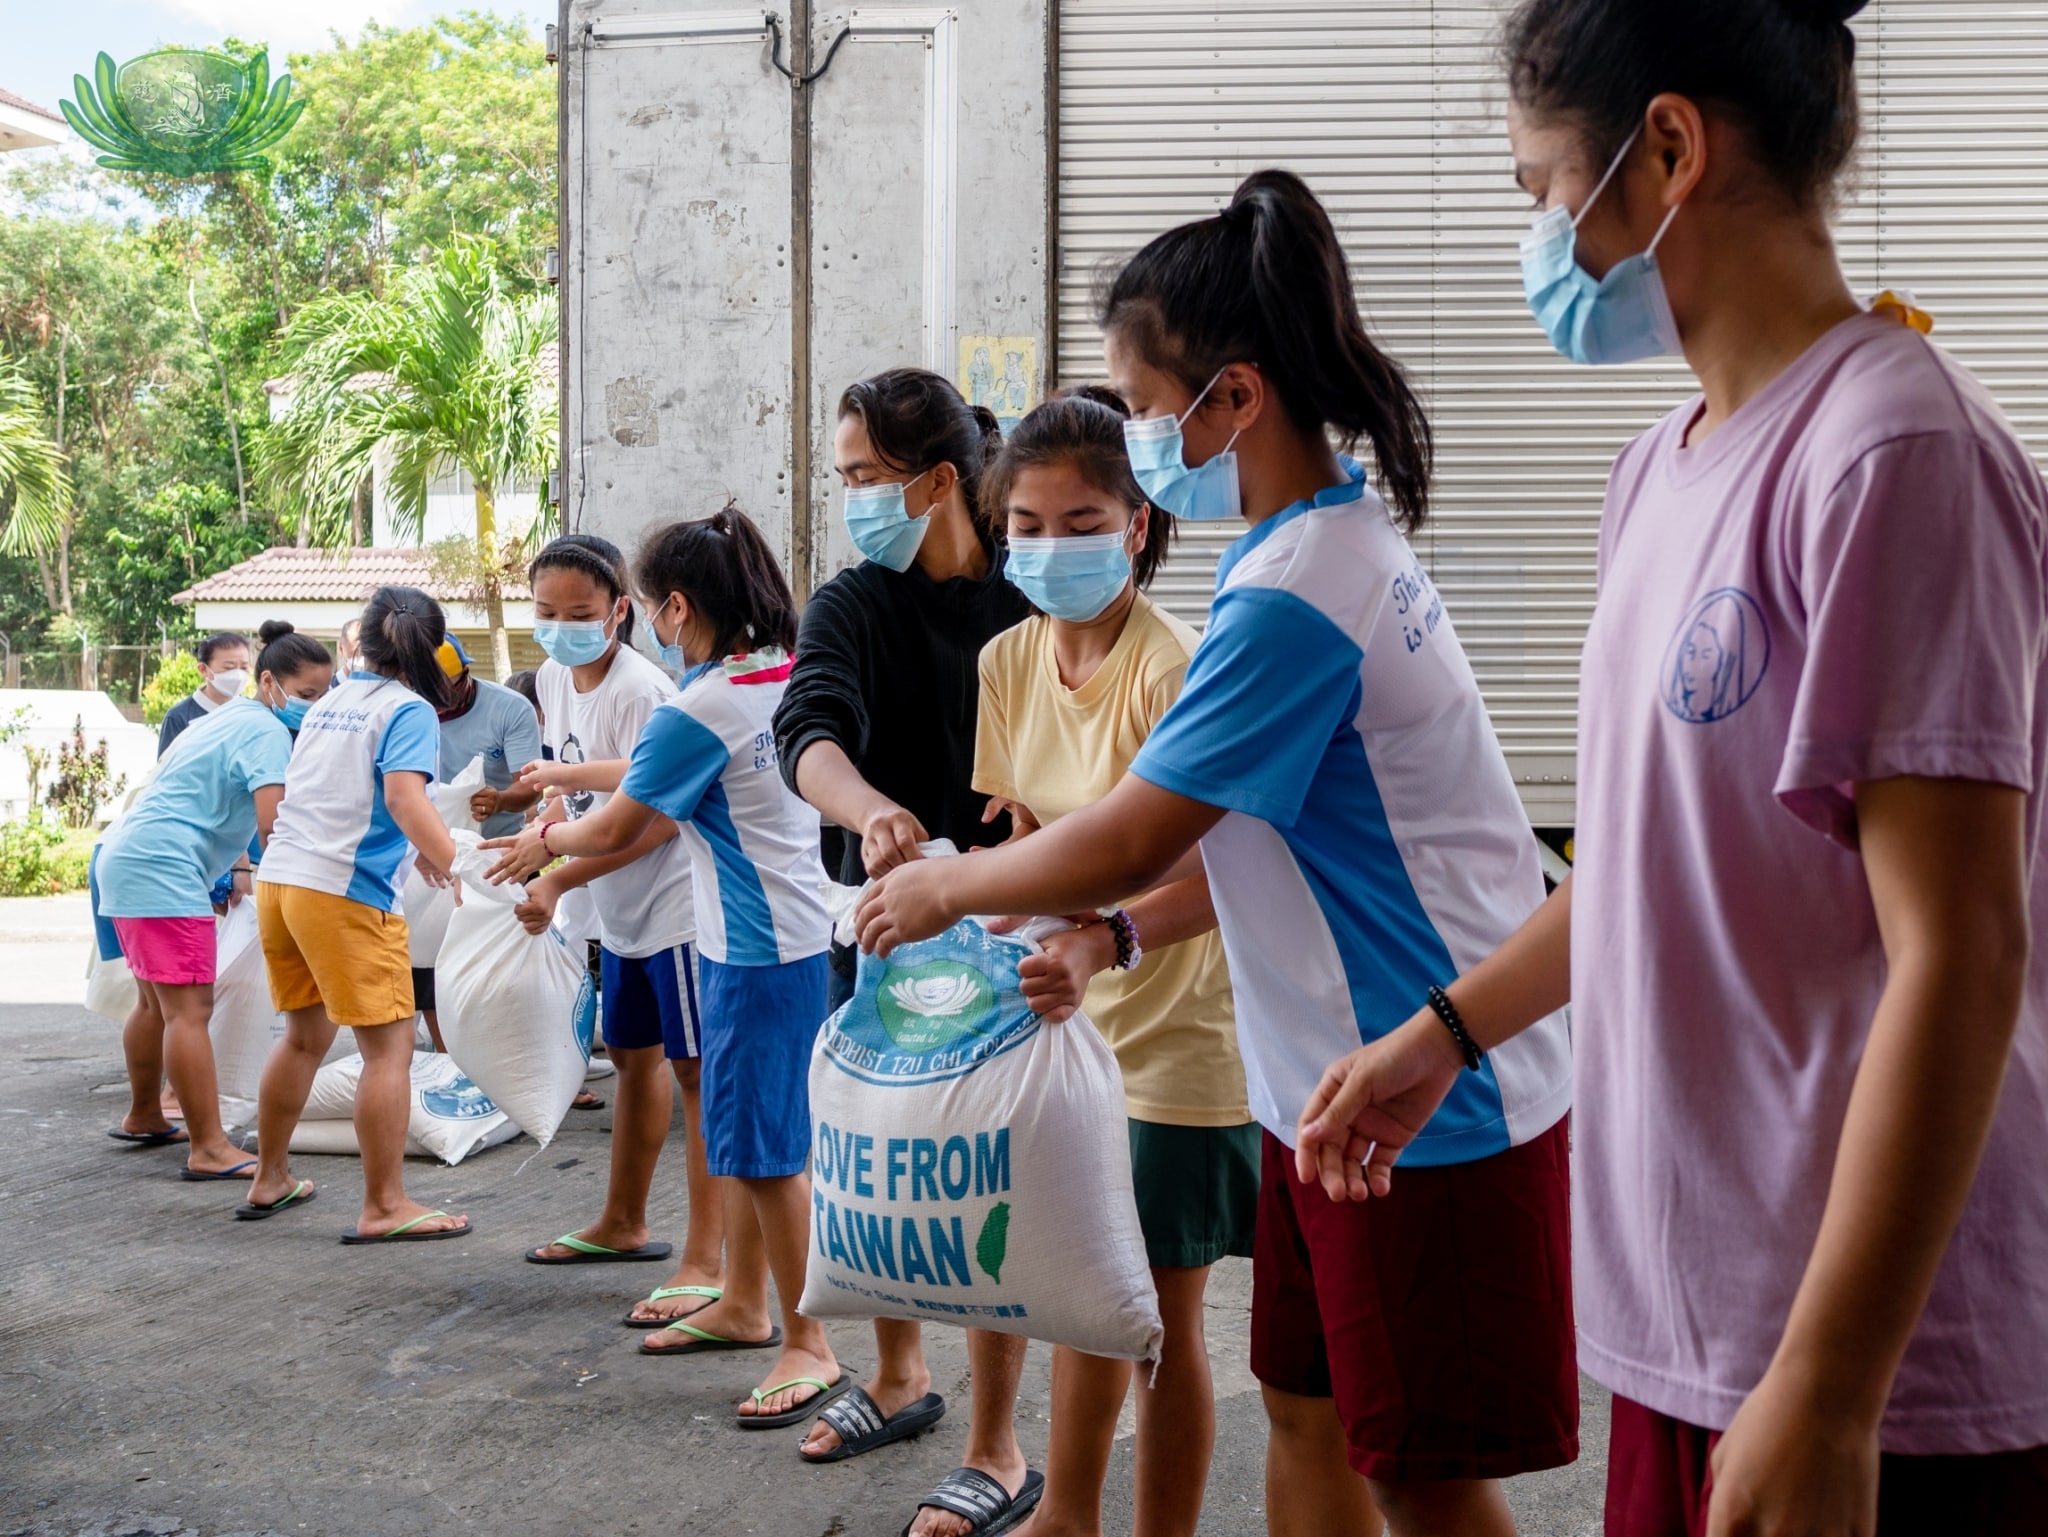 he students at Girlstown form a line to pass the sacks of rice donated by Tzu Chi Foundation.【Photo by Daniel Lazar】